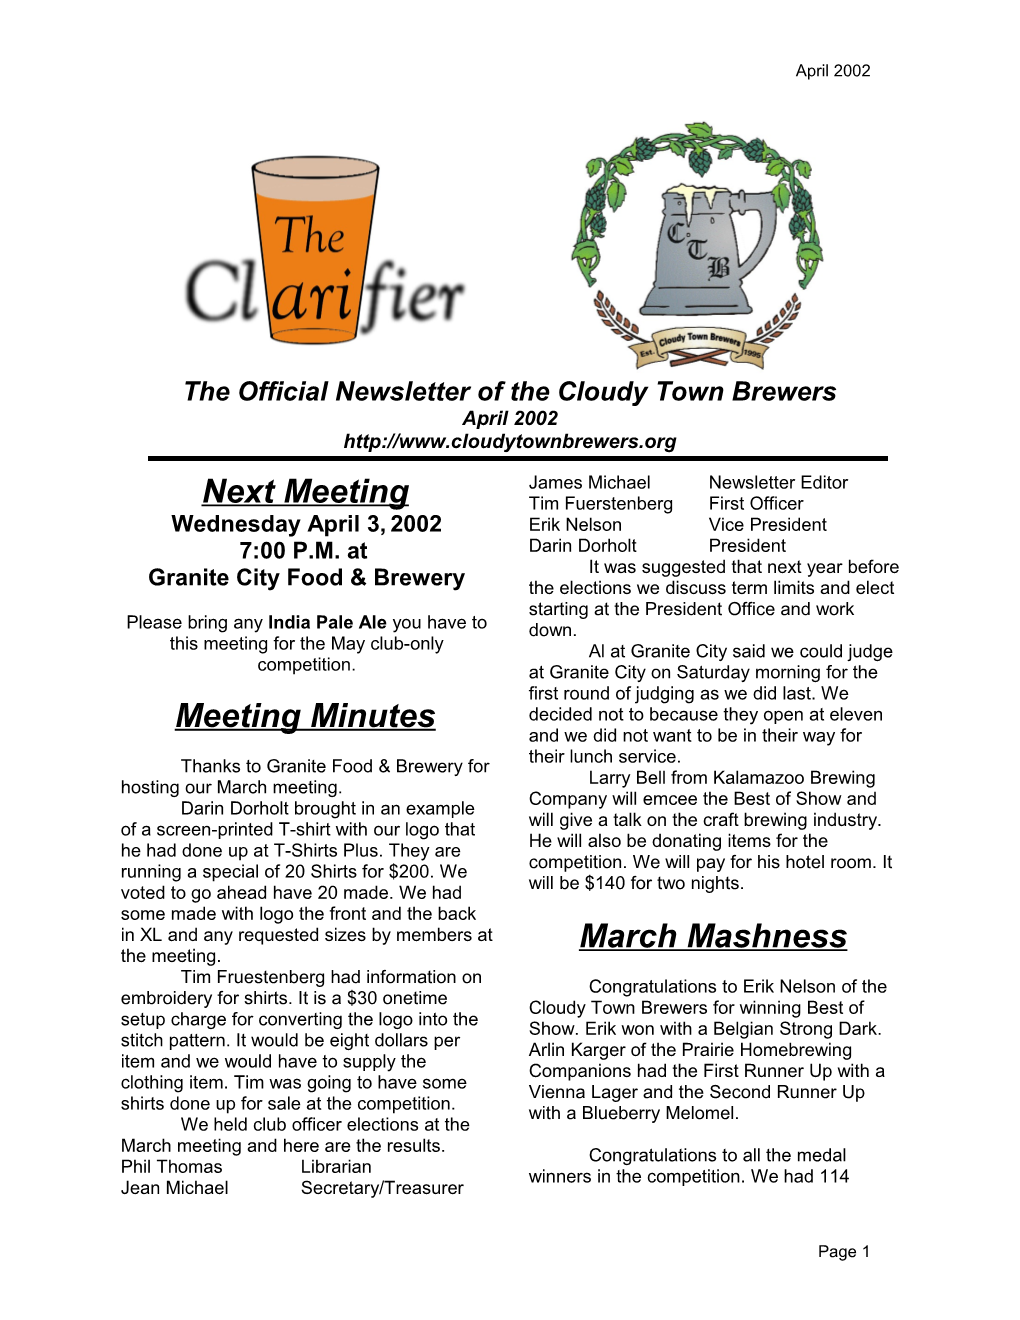 The Official Newsletter of the Cloudy Town Brewers